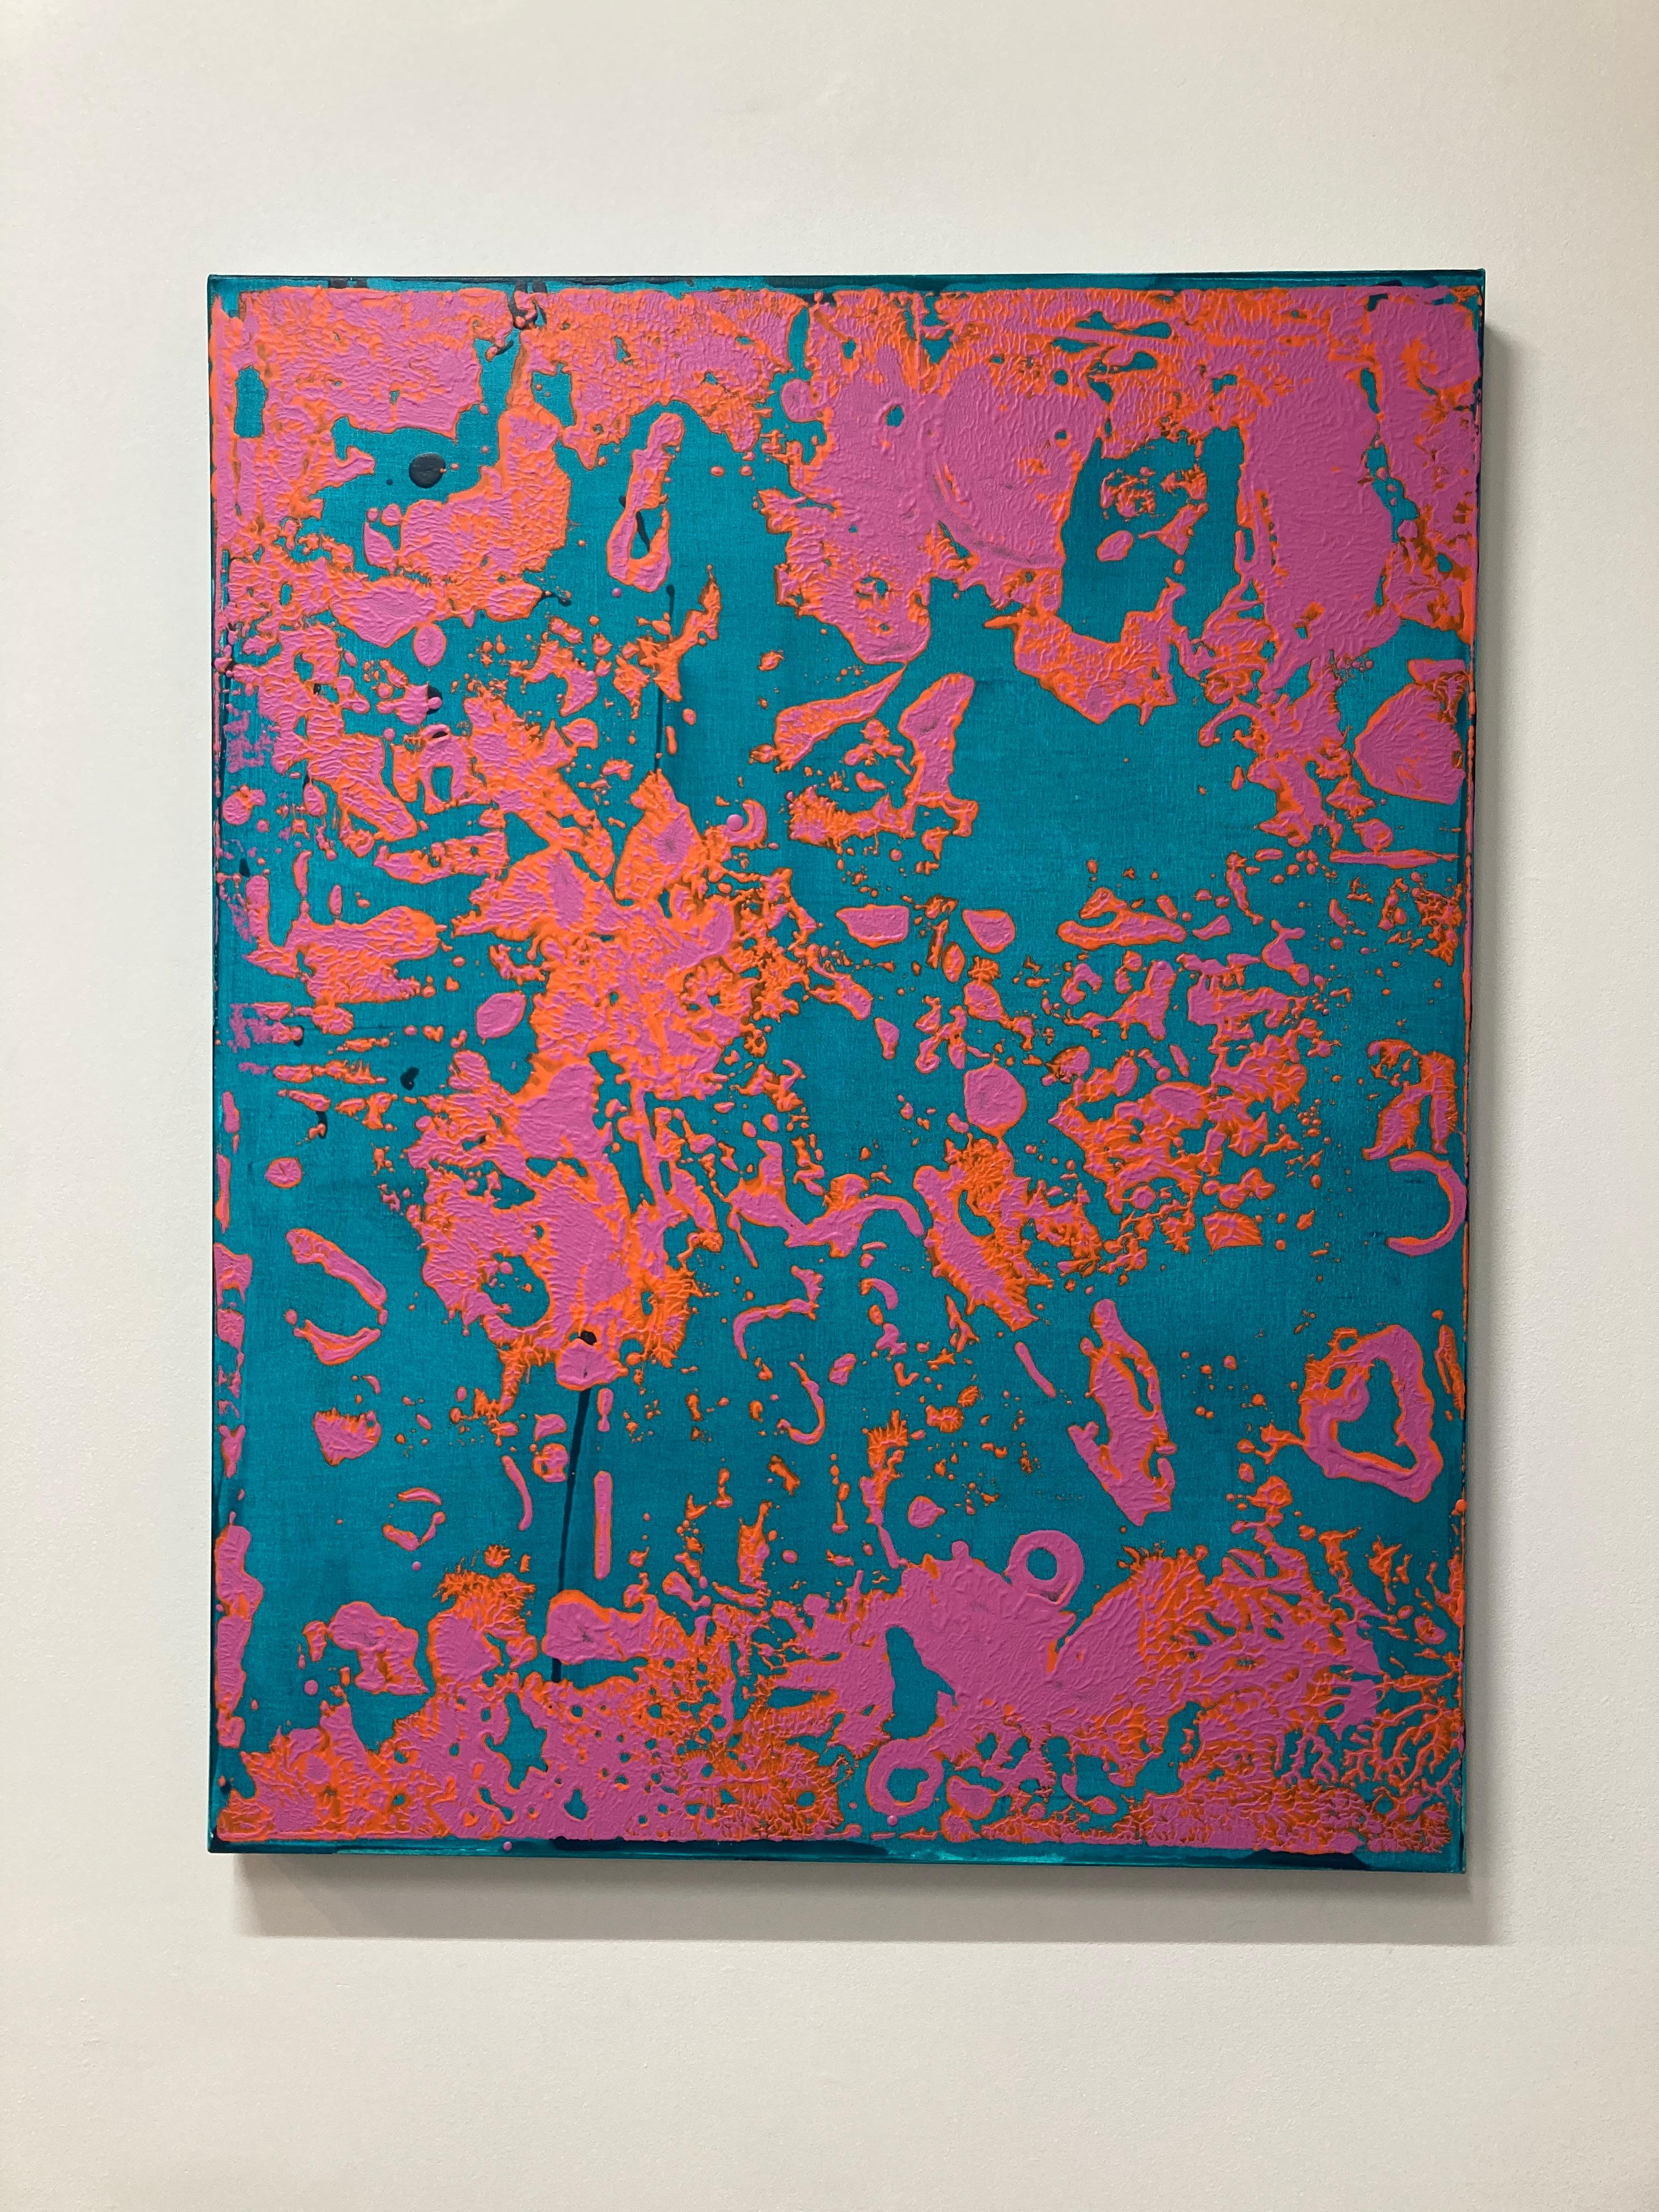 P18-0440 is a vertical abstract painting by Stephen Maine in bright hues of vibrant pink with bright orange details on a teal blue green background. This striking painting conveys movement and the suggestion of texture in the application of the